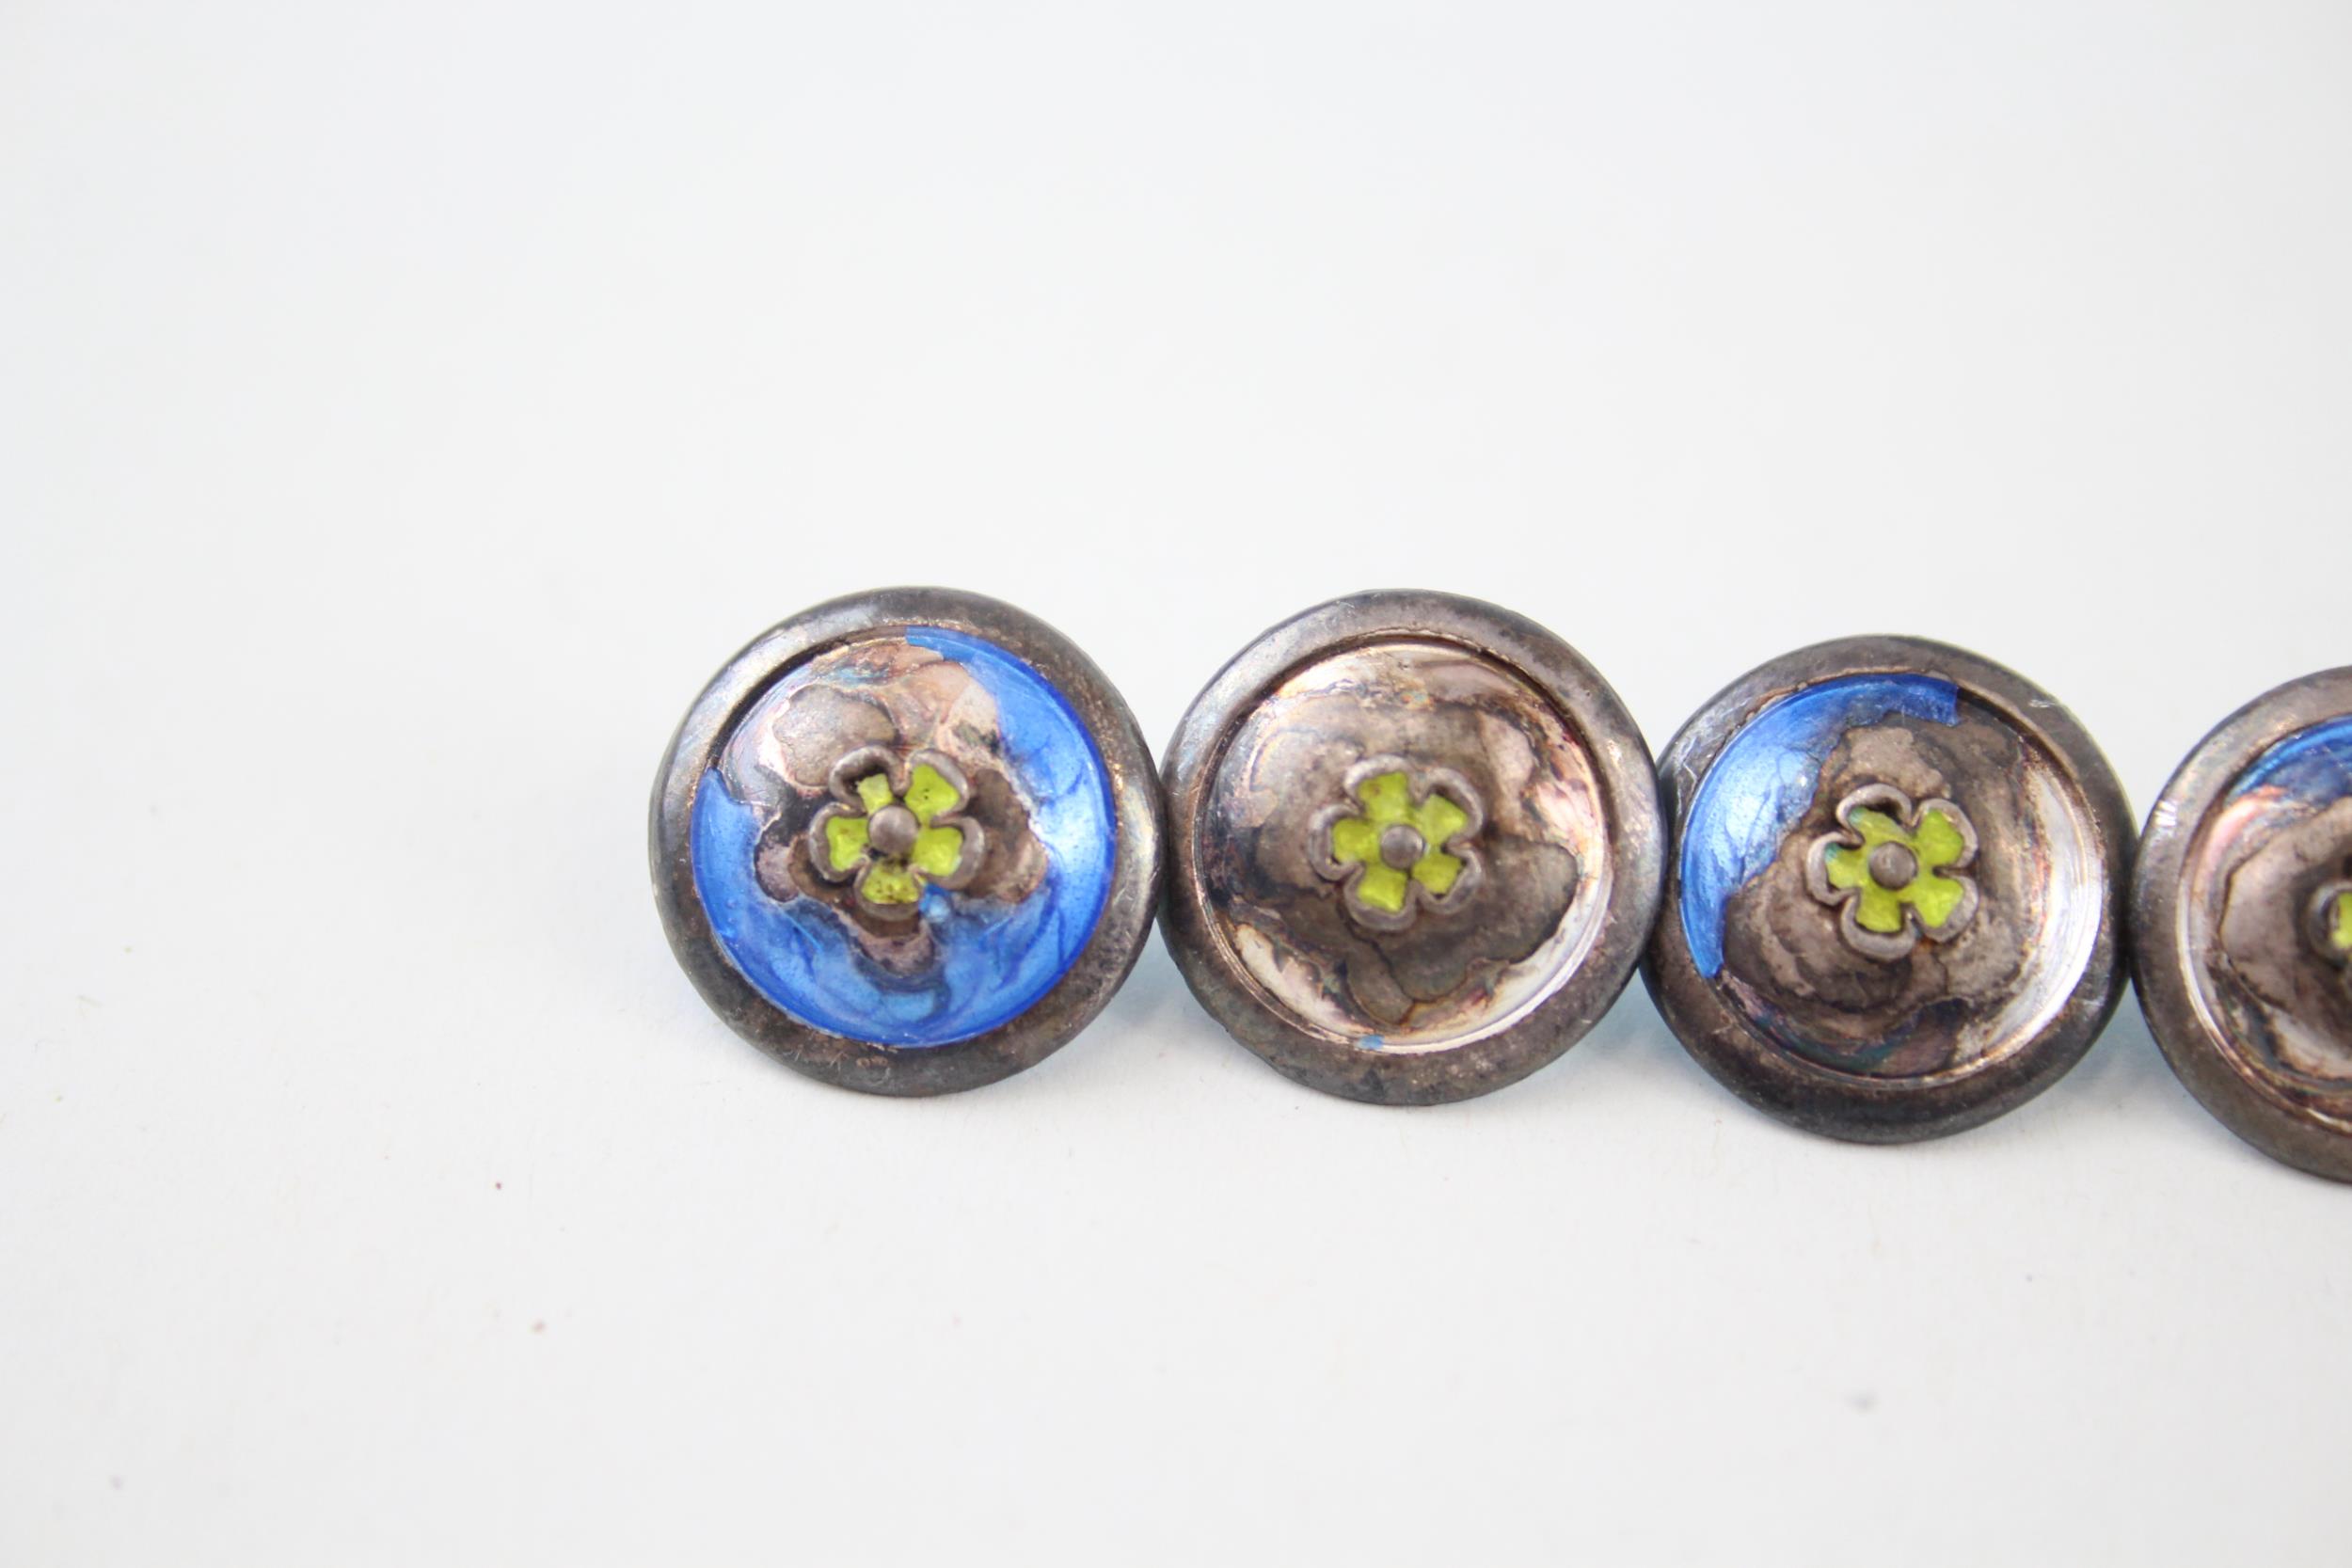 5 x Antique / Vintage Stamped .925 Sterling Silver Guilloche Enamel Buttons (8g) - Diameter - 1. - Image 2 of 5